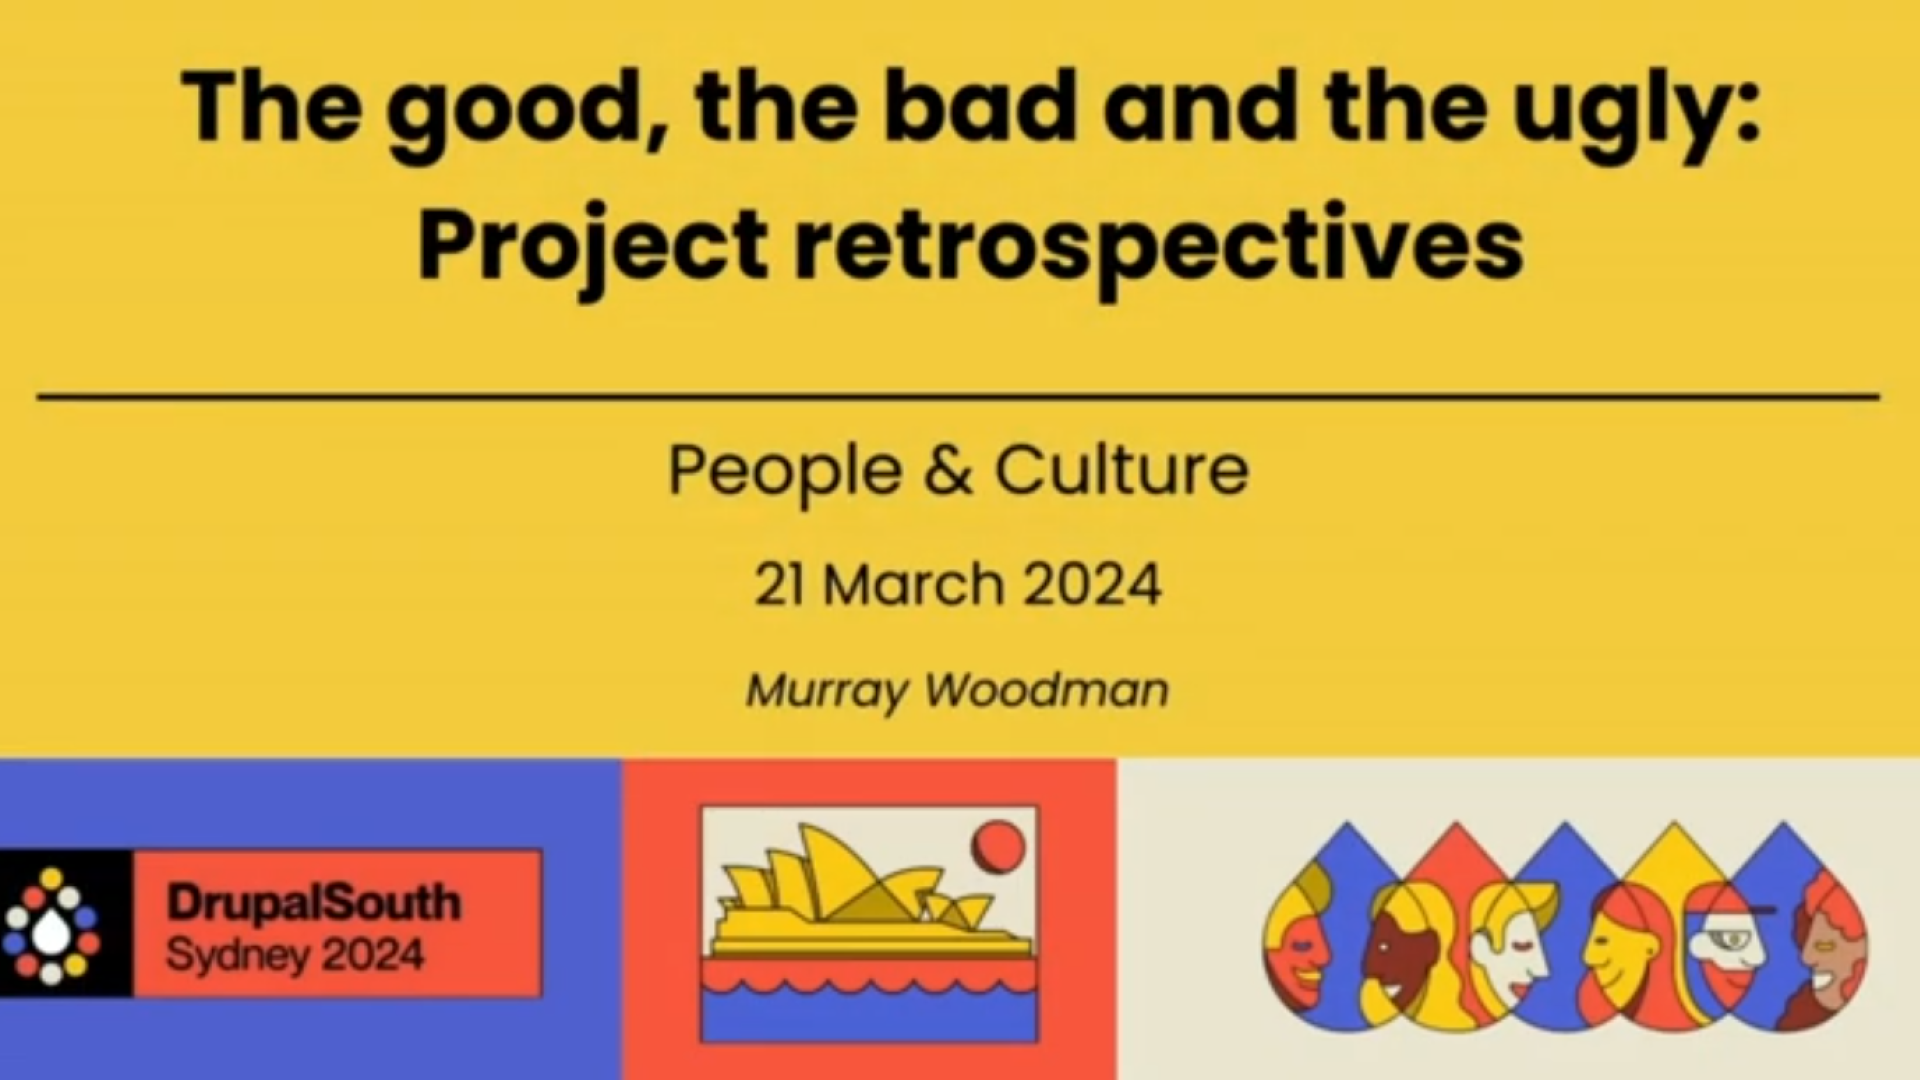 The good, the bad and the ugly: Project retrospectives / People & Culture / Murray Woodman